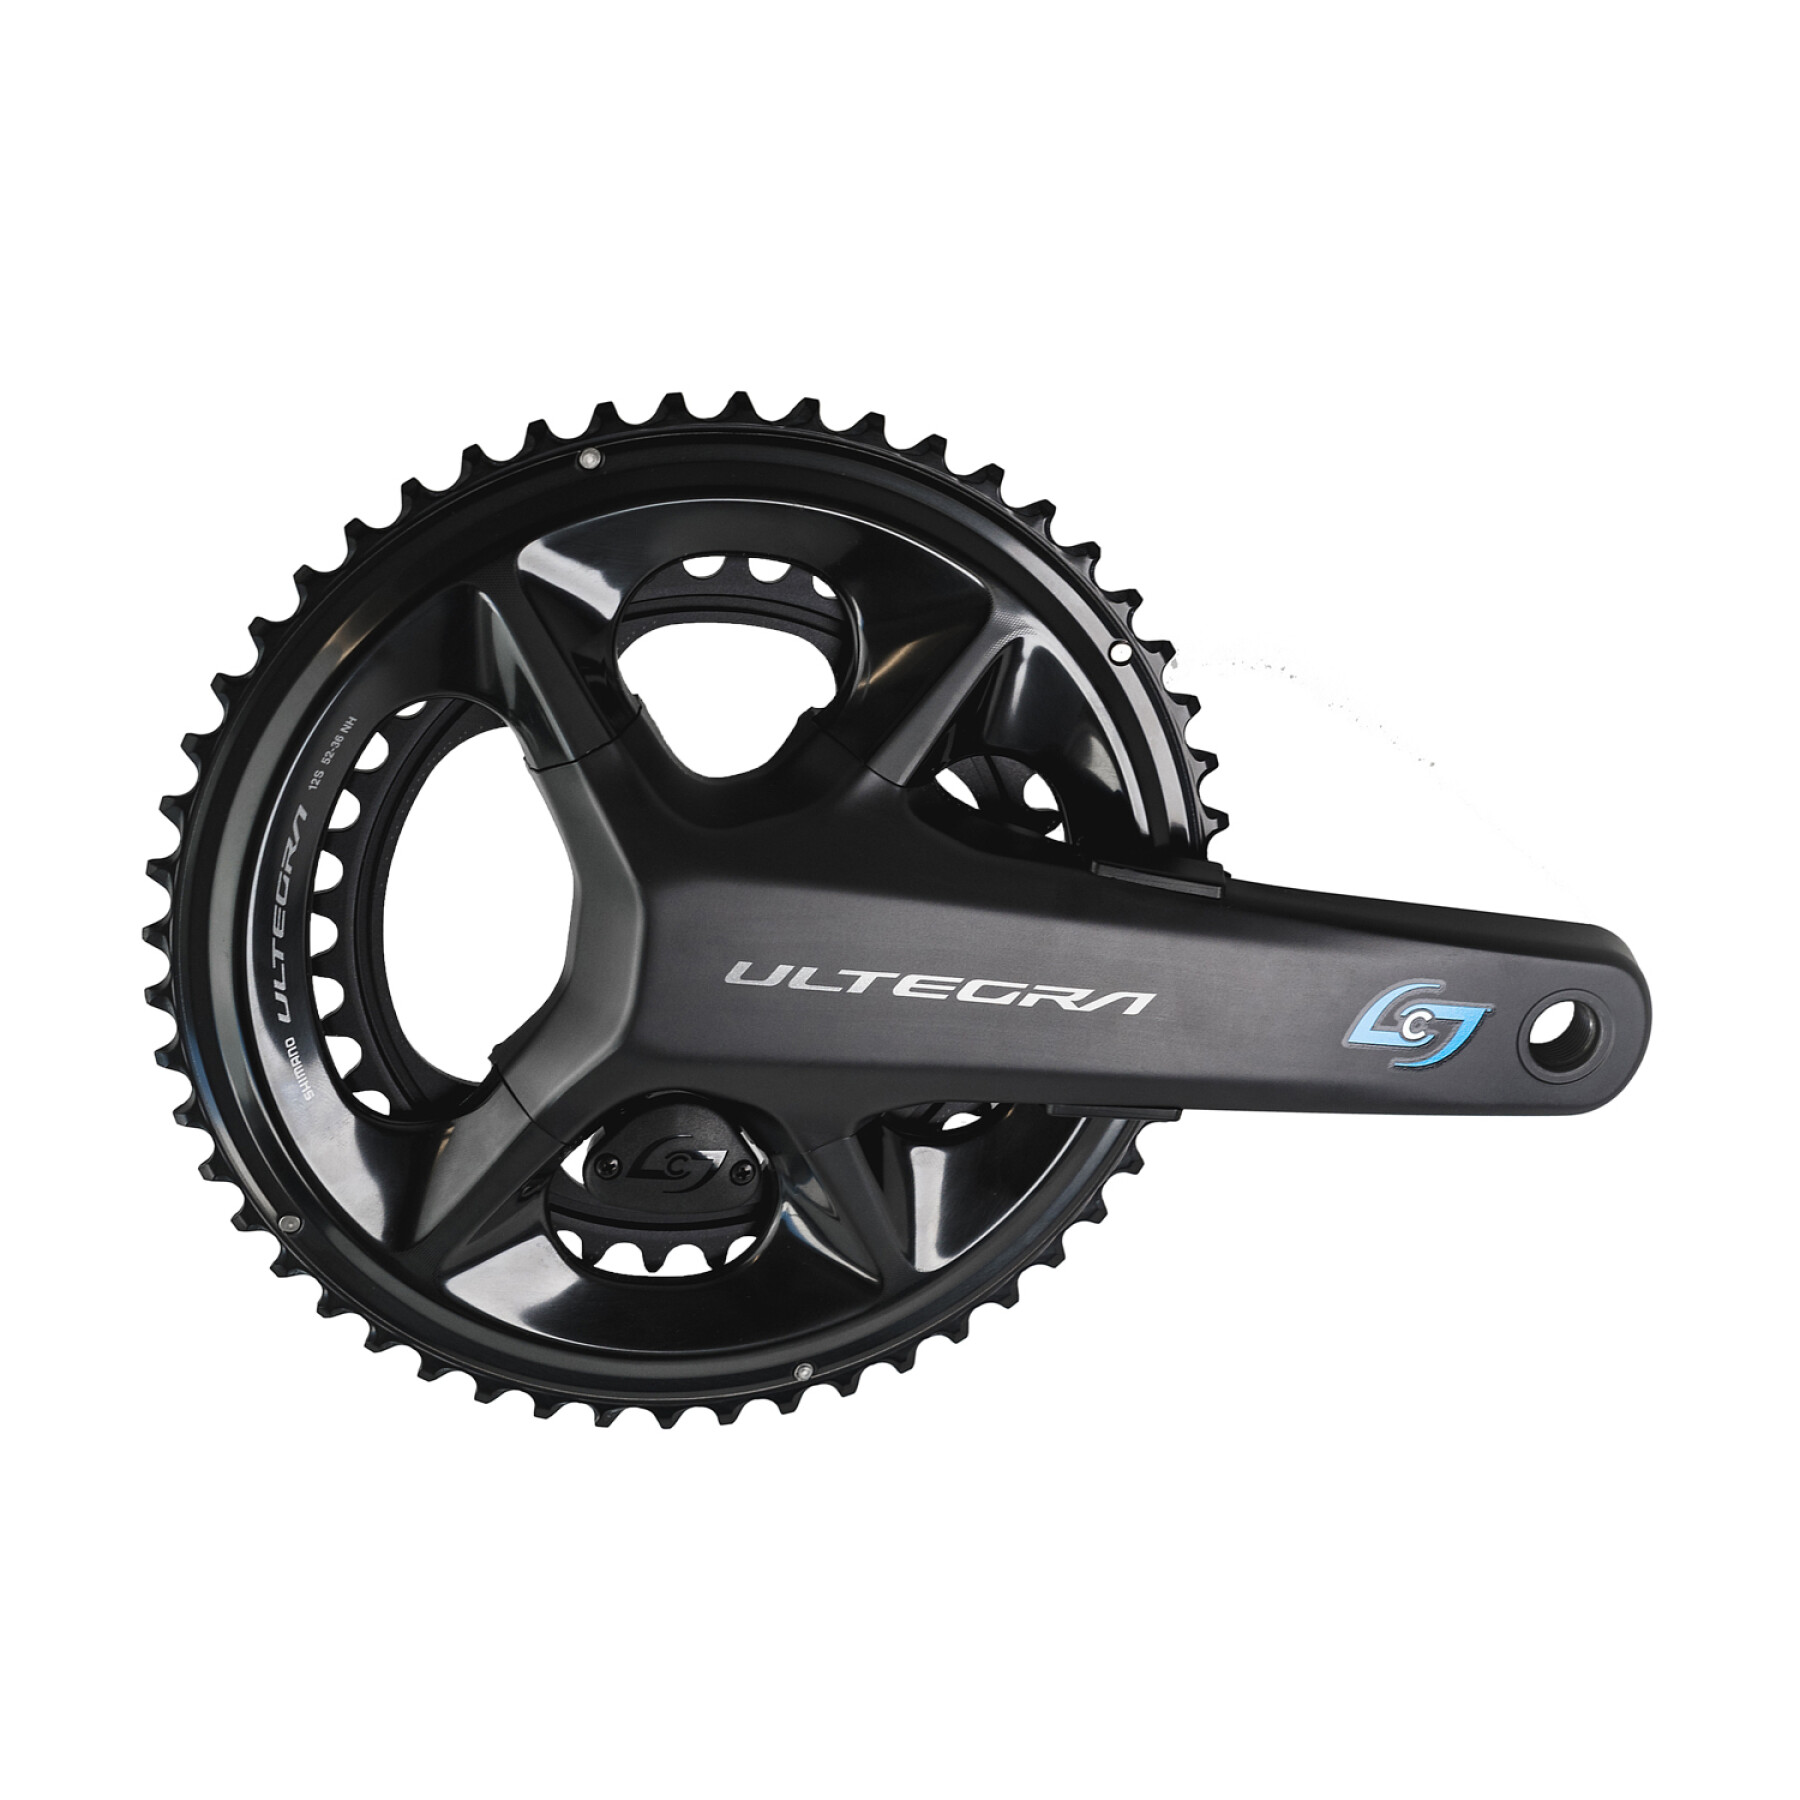 Krukken Stages Cycling Stages Power R - Shimano Ultegra R8000 - 165mn 50/34